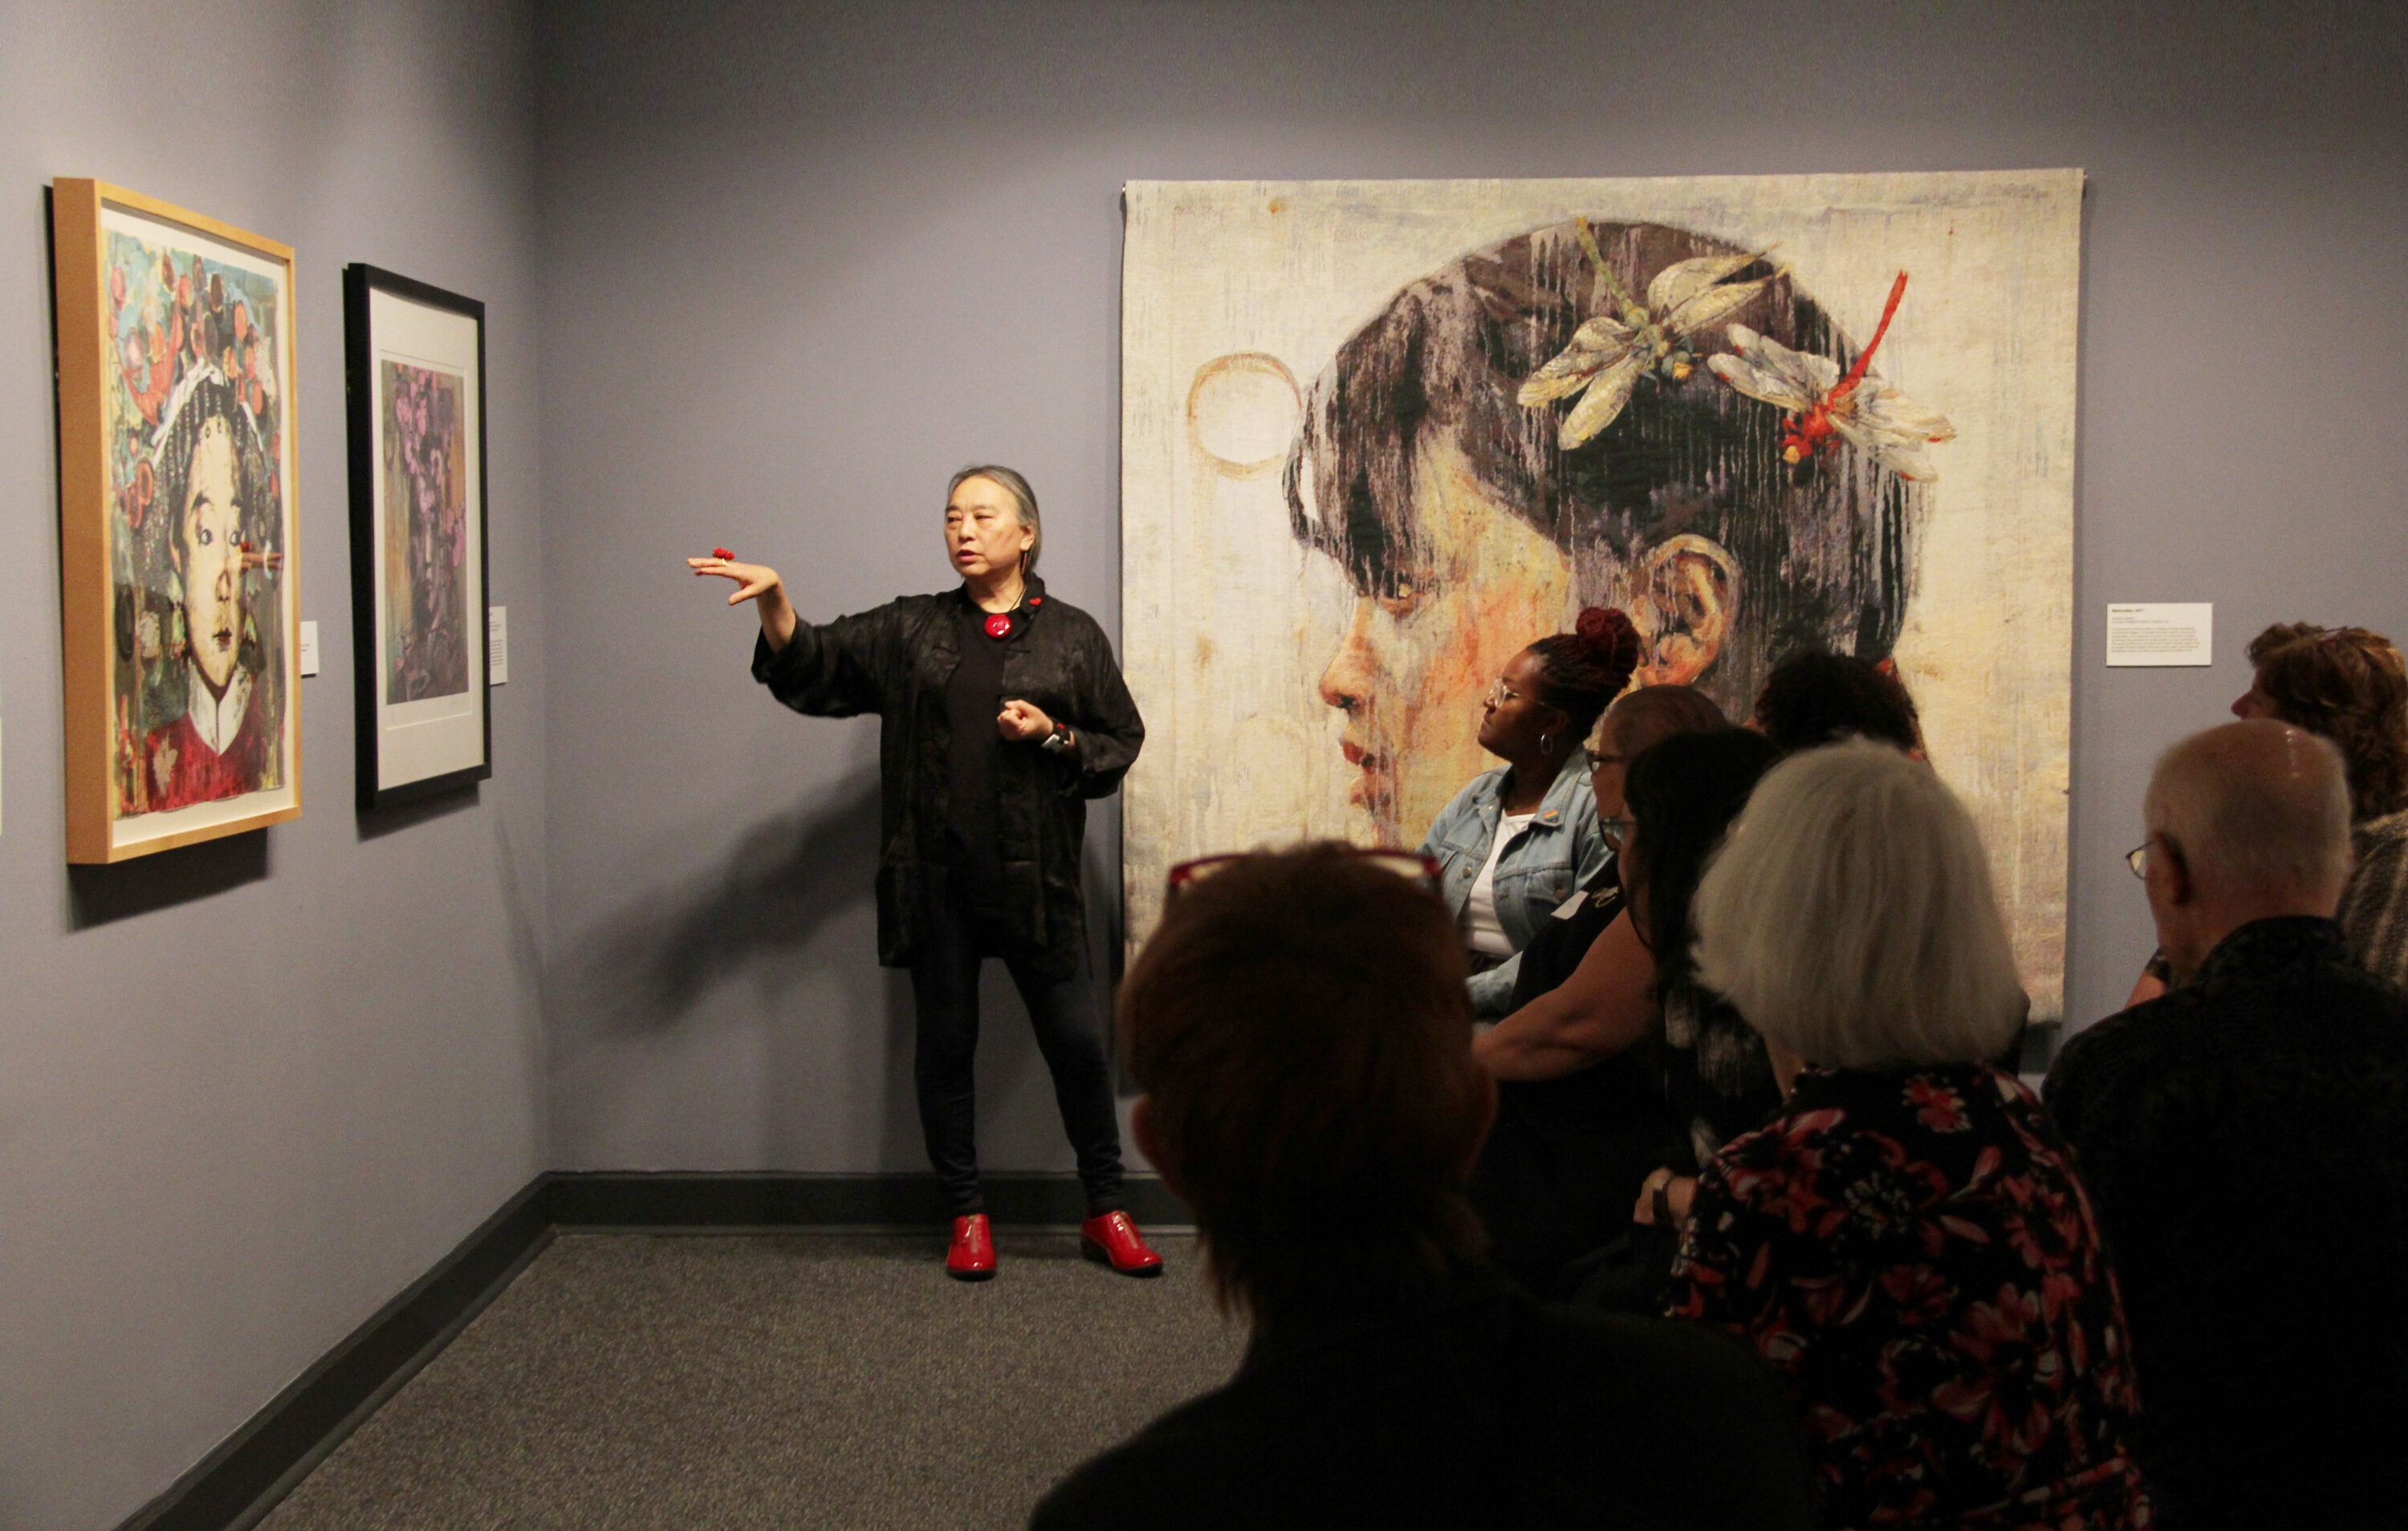 Hung Liu speaks to an audience about her paintings of Chinese women, which hang on the walls around her. Liu is a light-skinned adult woman with gray hair in a low ponytail, dressed in black with red jewelry and shoes. She stands, gesturing with one hand at a painting to her right.